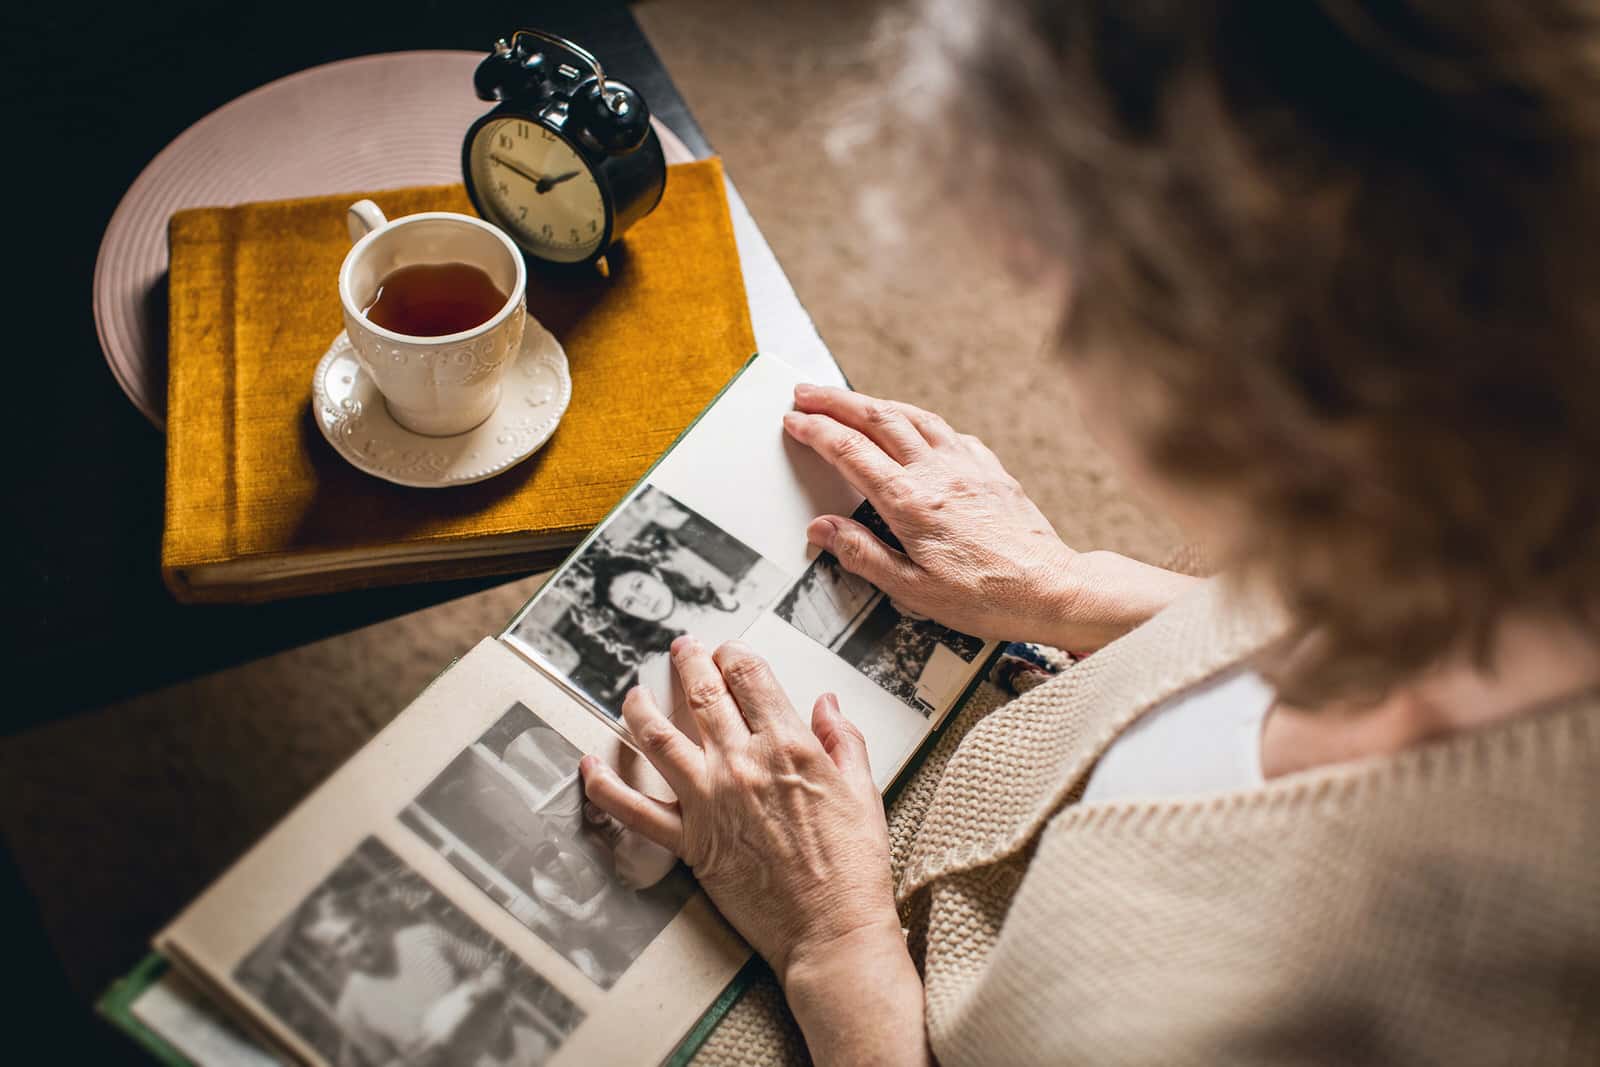 An older woman looks back on vintage photos while drinking coffee. Nostalgia marketing depends on these strong connections to the past.